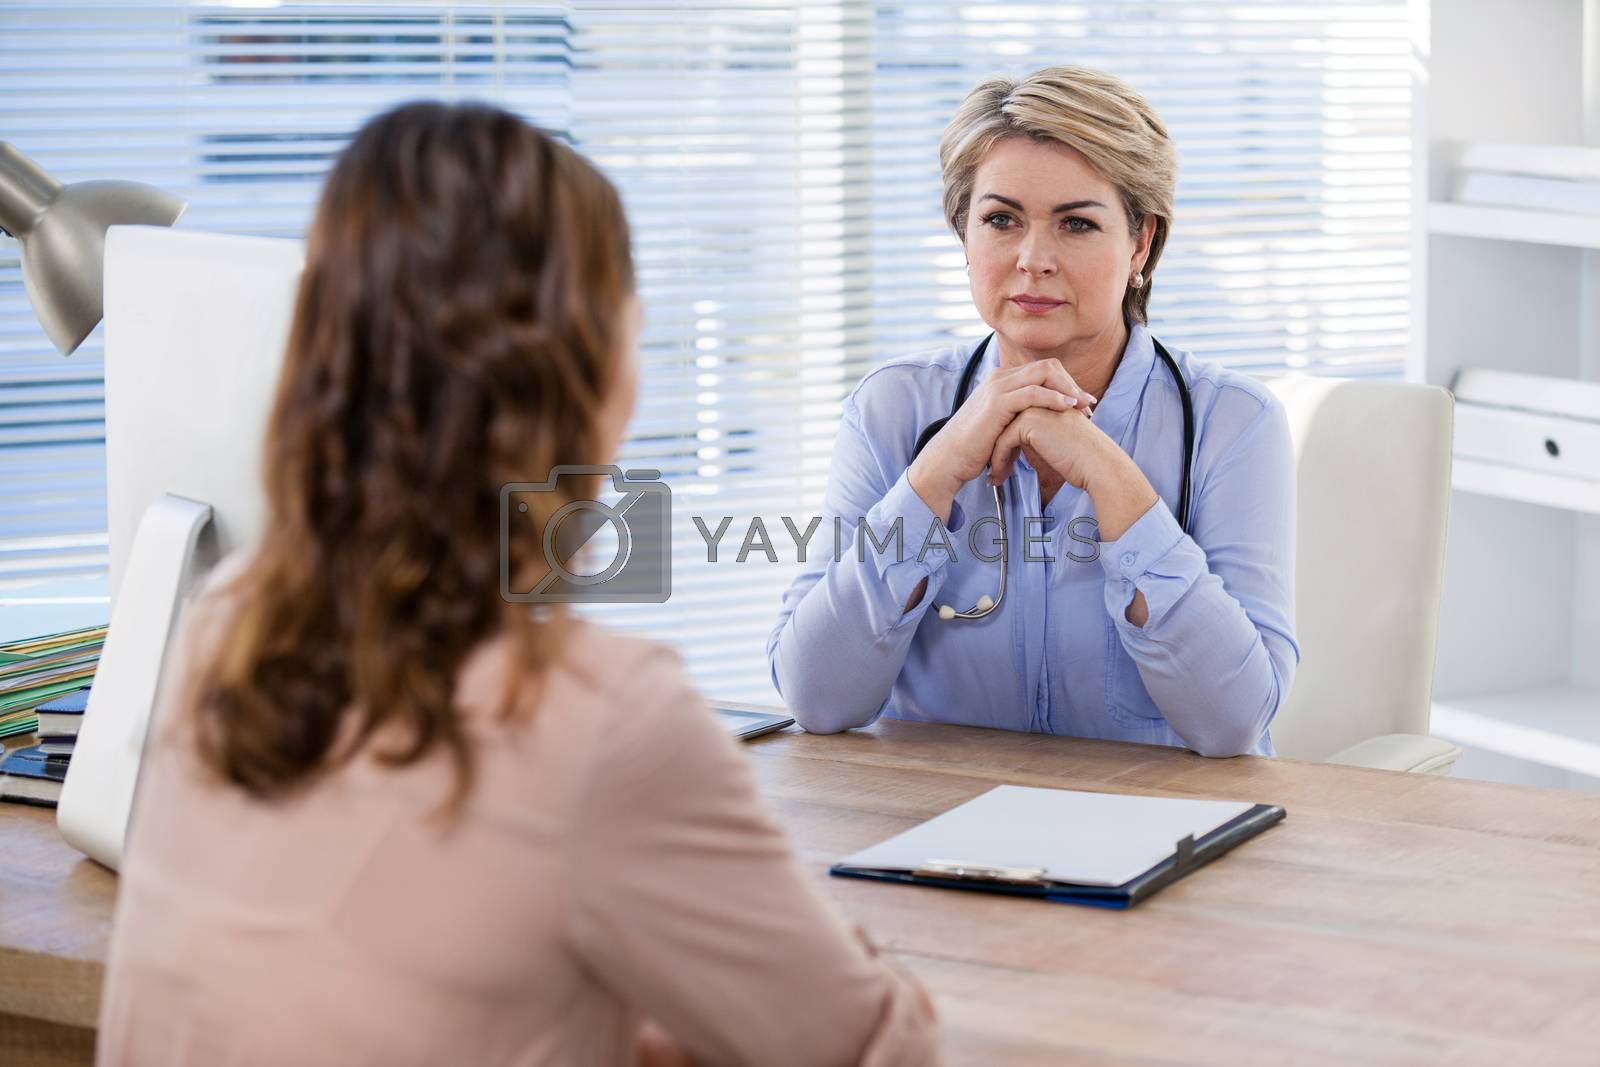 Royalty free image of Patient consulting a doctor by Wavebreakmedia